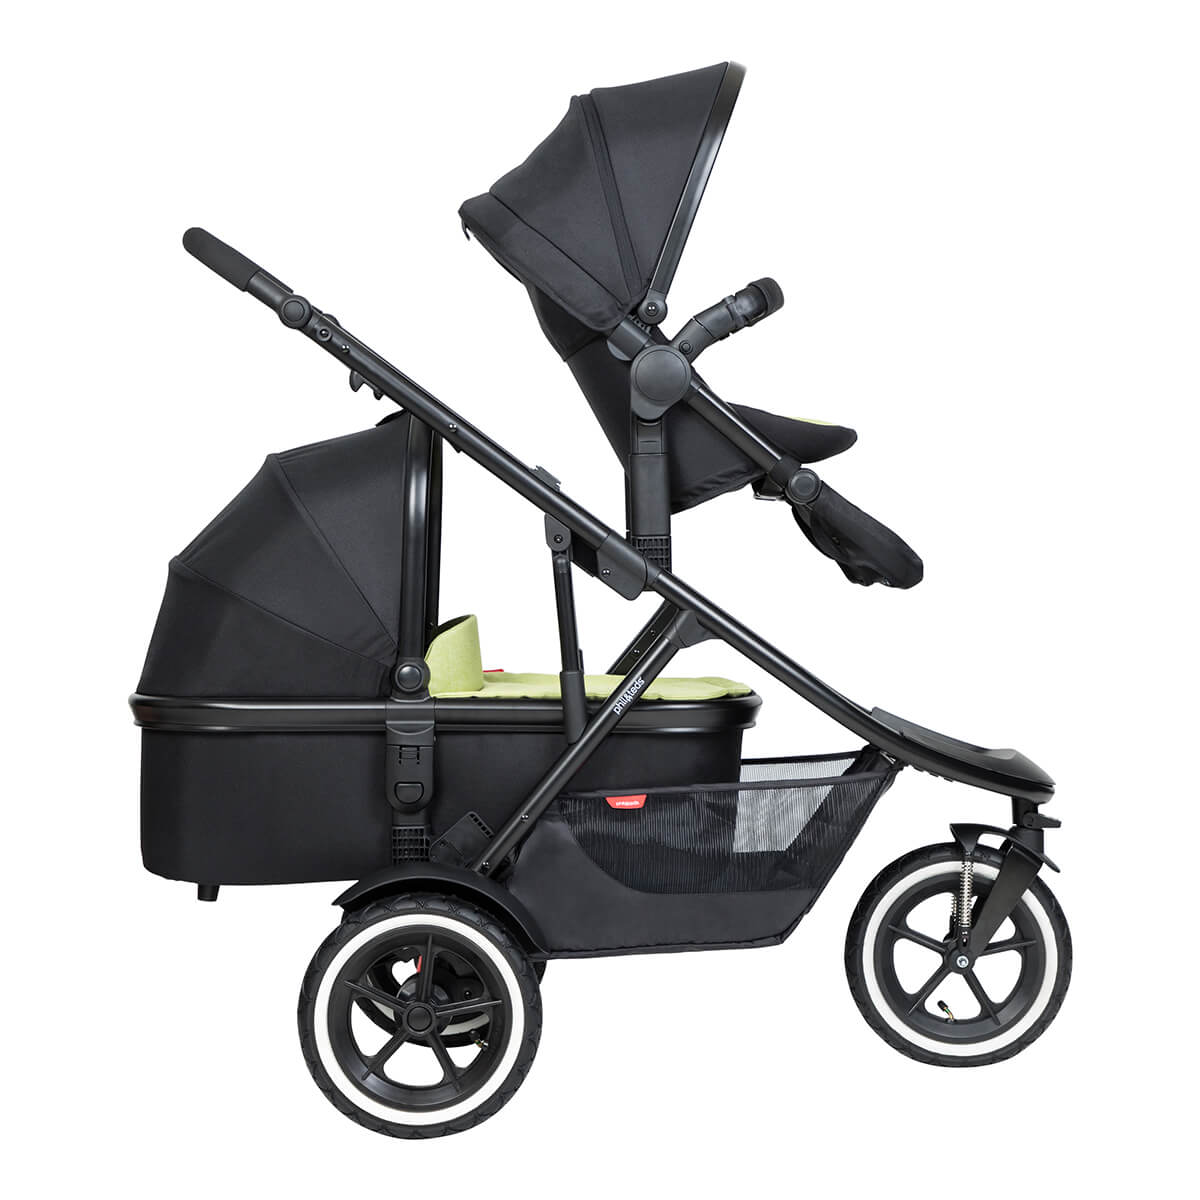 https://cdn.accentuate.io/4417306918946/19437753499826/philteds-sport-buggy-with-double-kit-extended-clip-and-snug-carrycot-side-view-v1626482808742.jpg?1200x1200